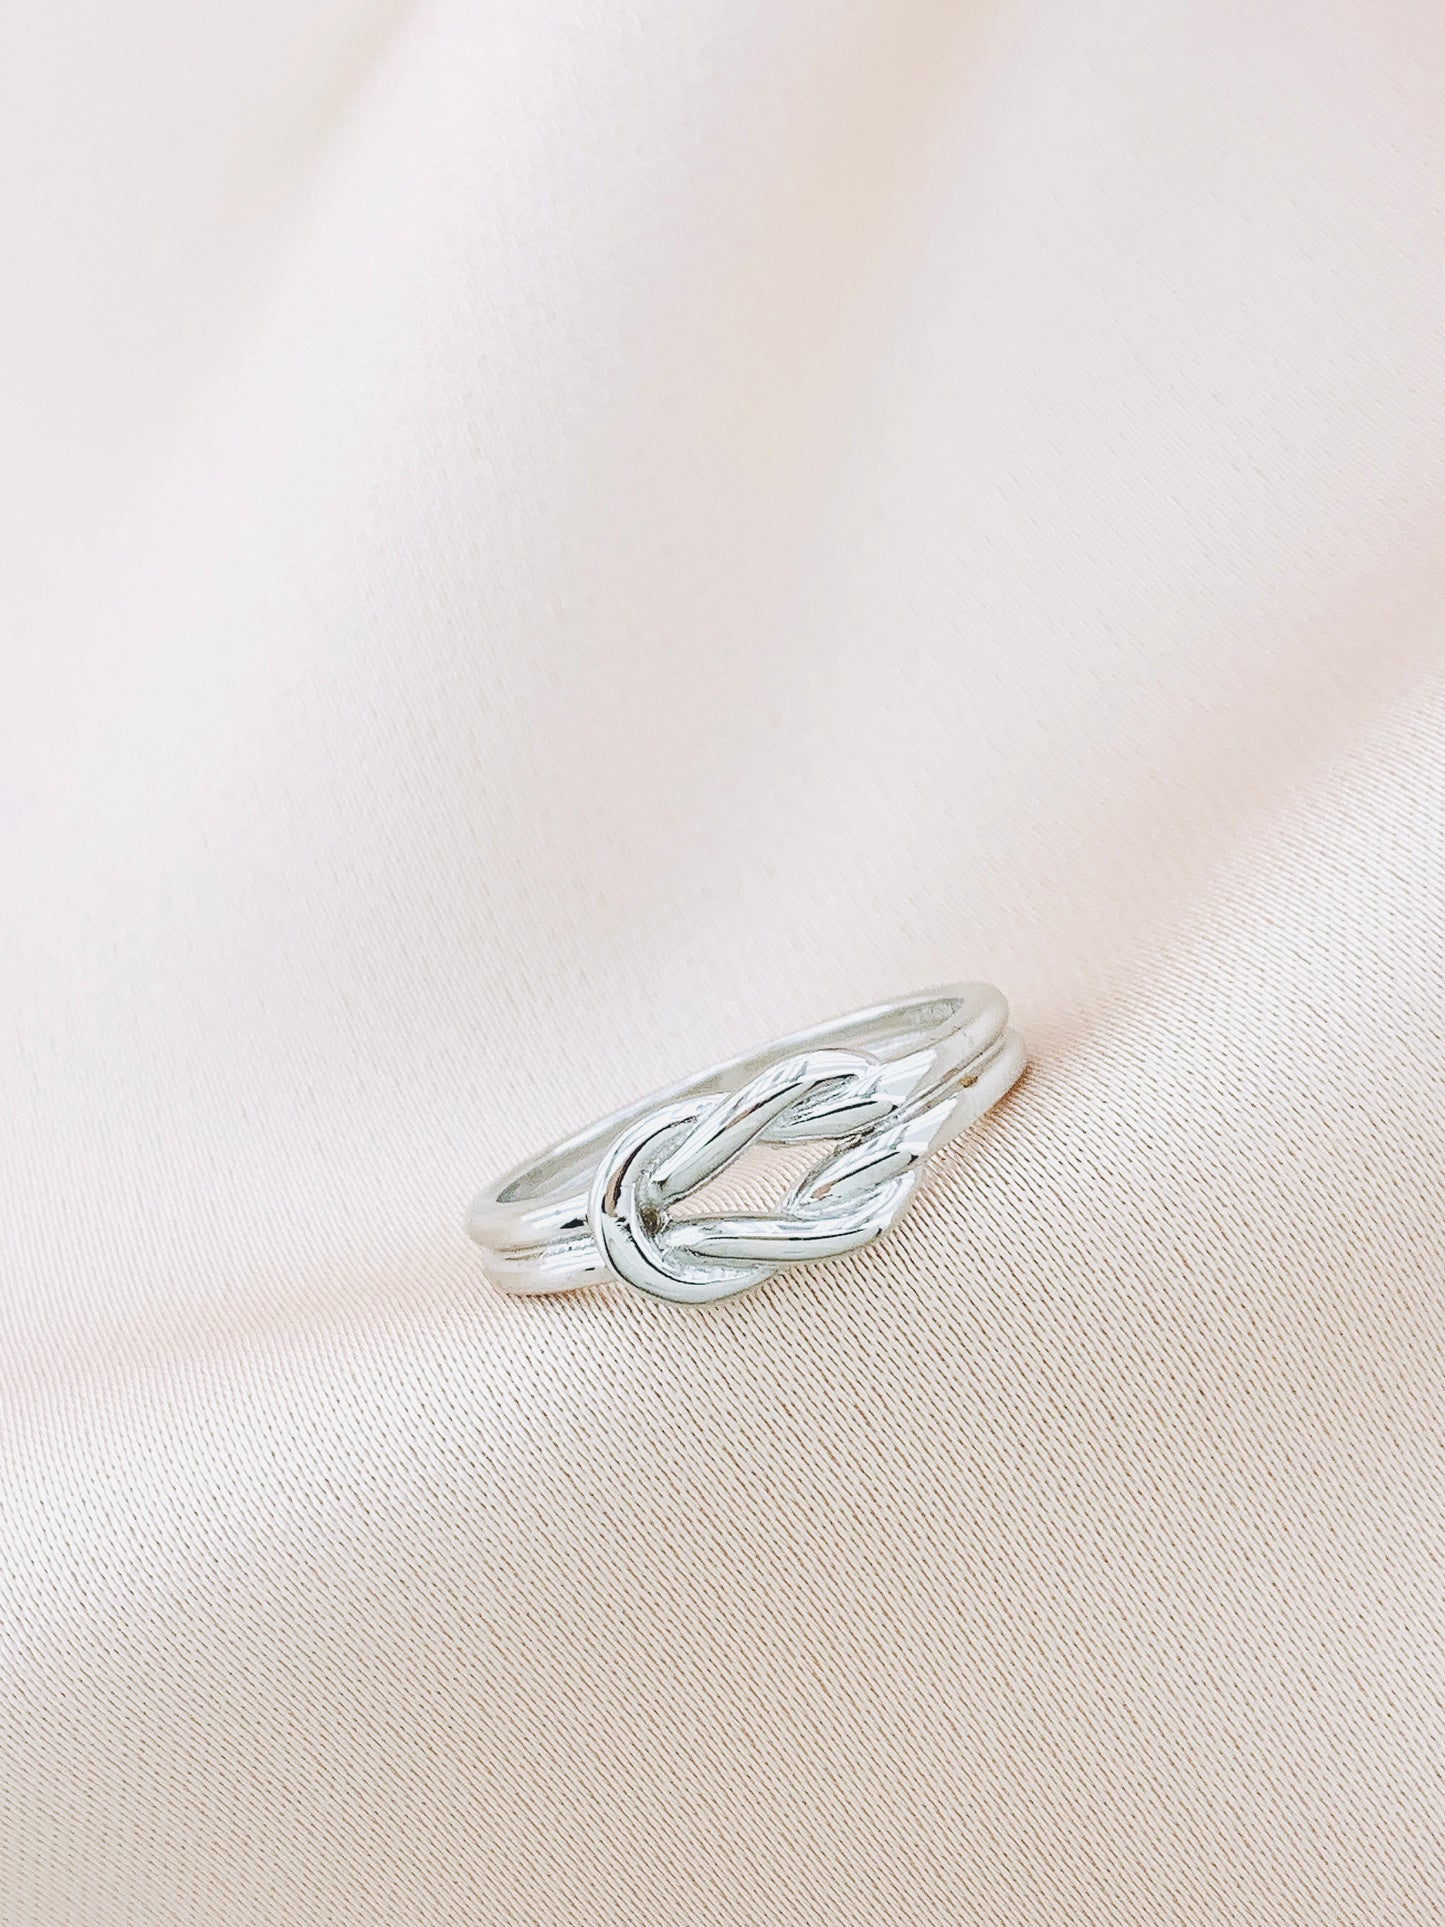 925 Silver Love Knot Plain Ring